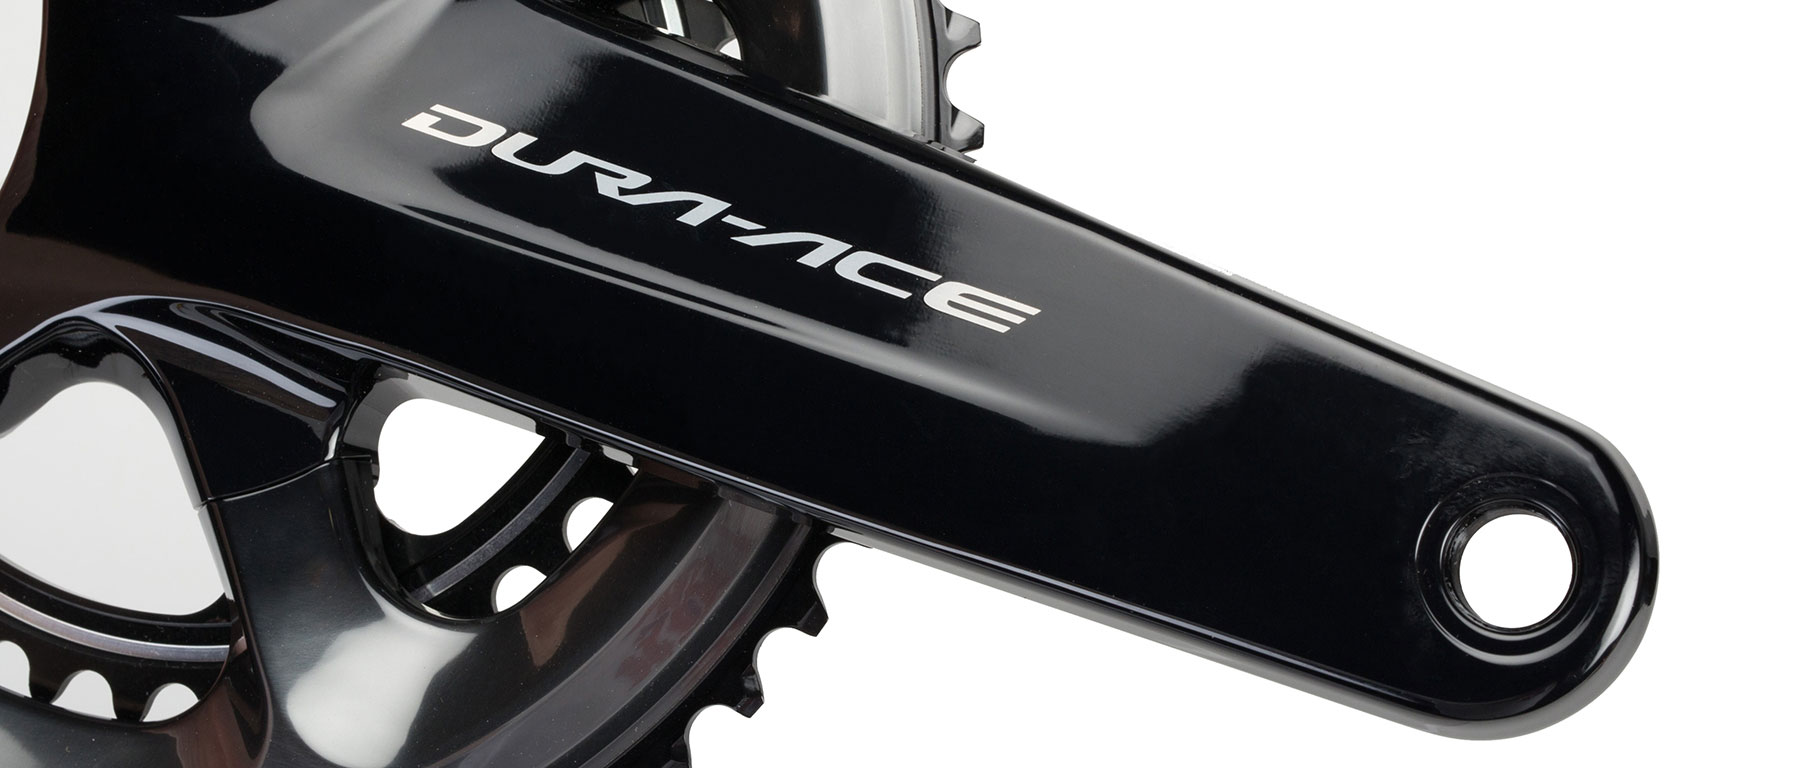 Shimano Dura-Ace FC-R9100 Crankset Excel Sports | Shop Online From 